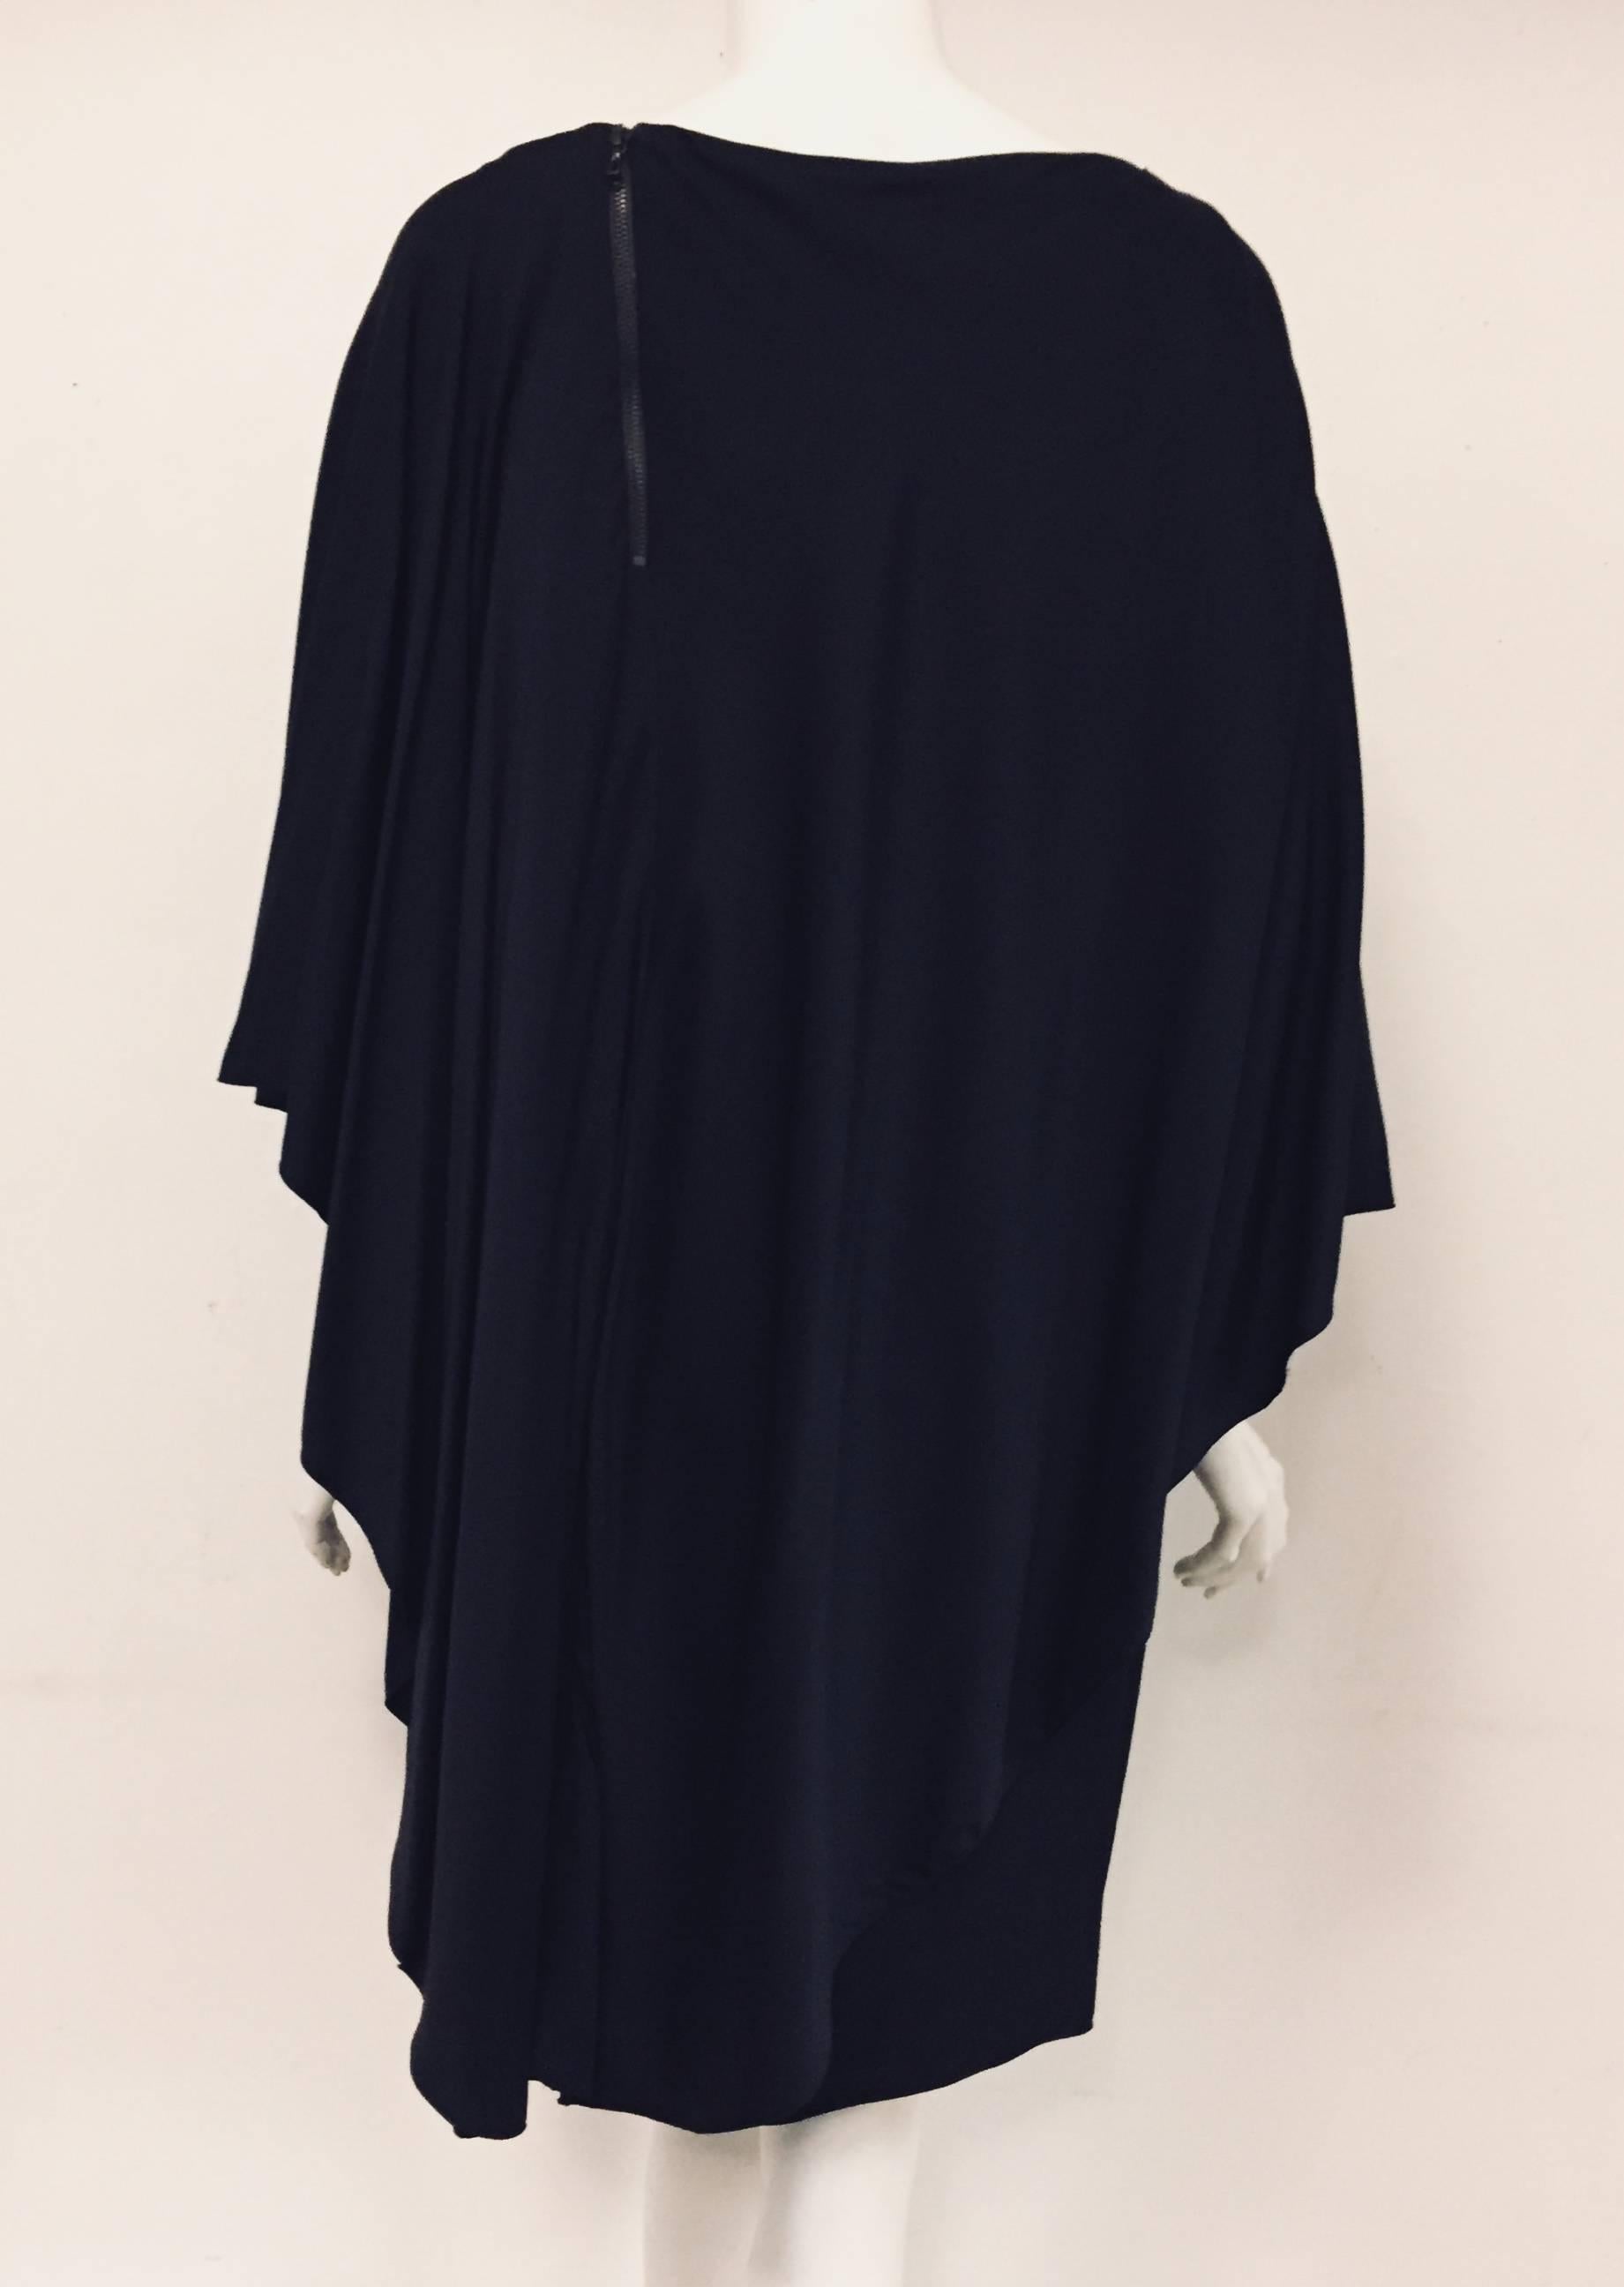 Lanvin navy blue cape dress is a study in couture techniques!  Dramatic, asymmetric, attached cape reveals sleeveless, knee-length dress.  Bateau neckline and exposed zip closure at shoulder are the finishing touches.  

Made in France